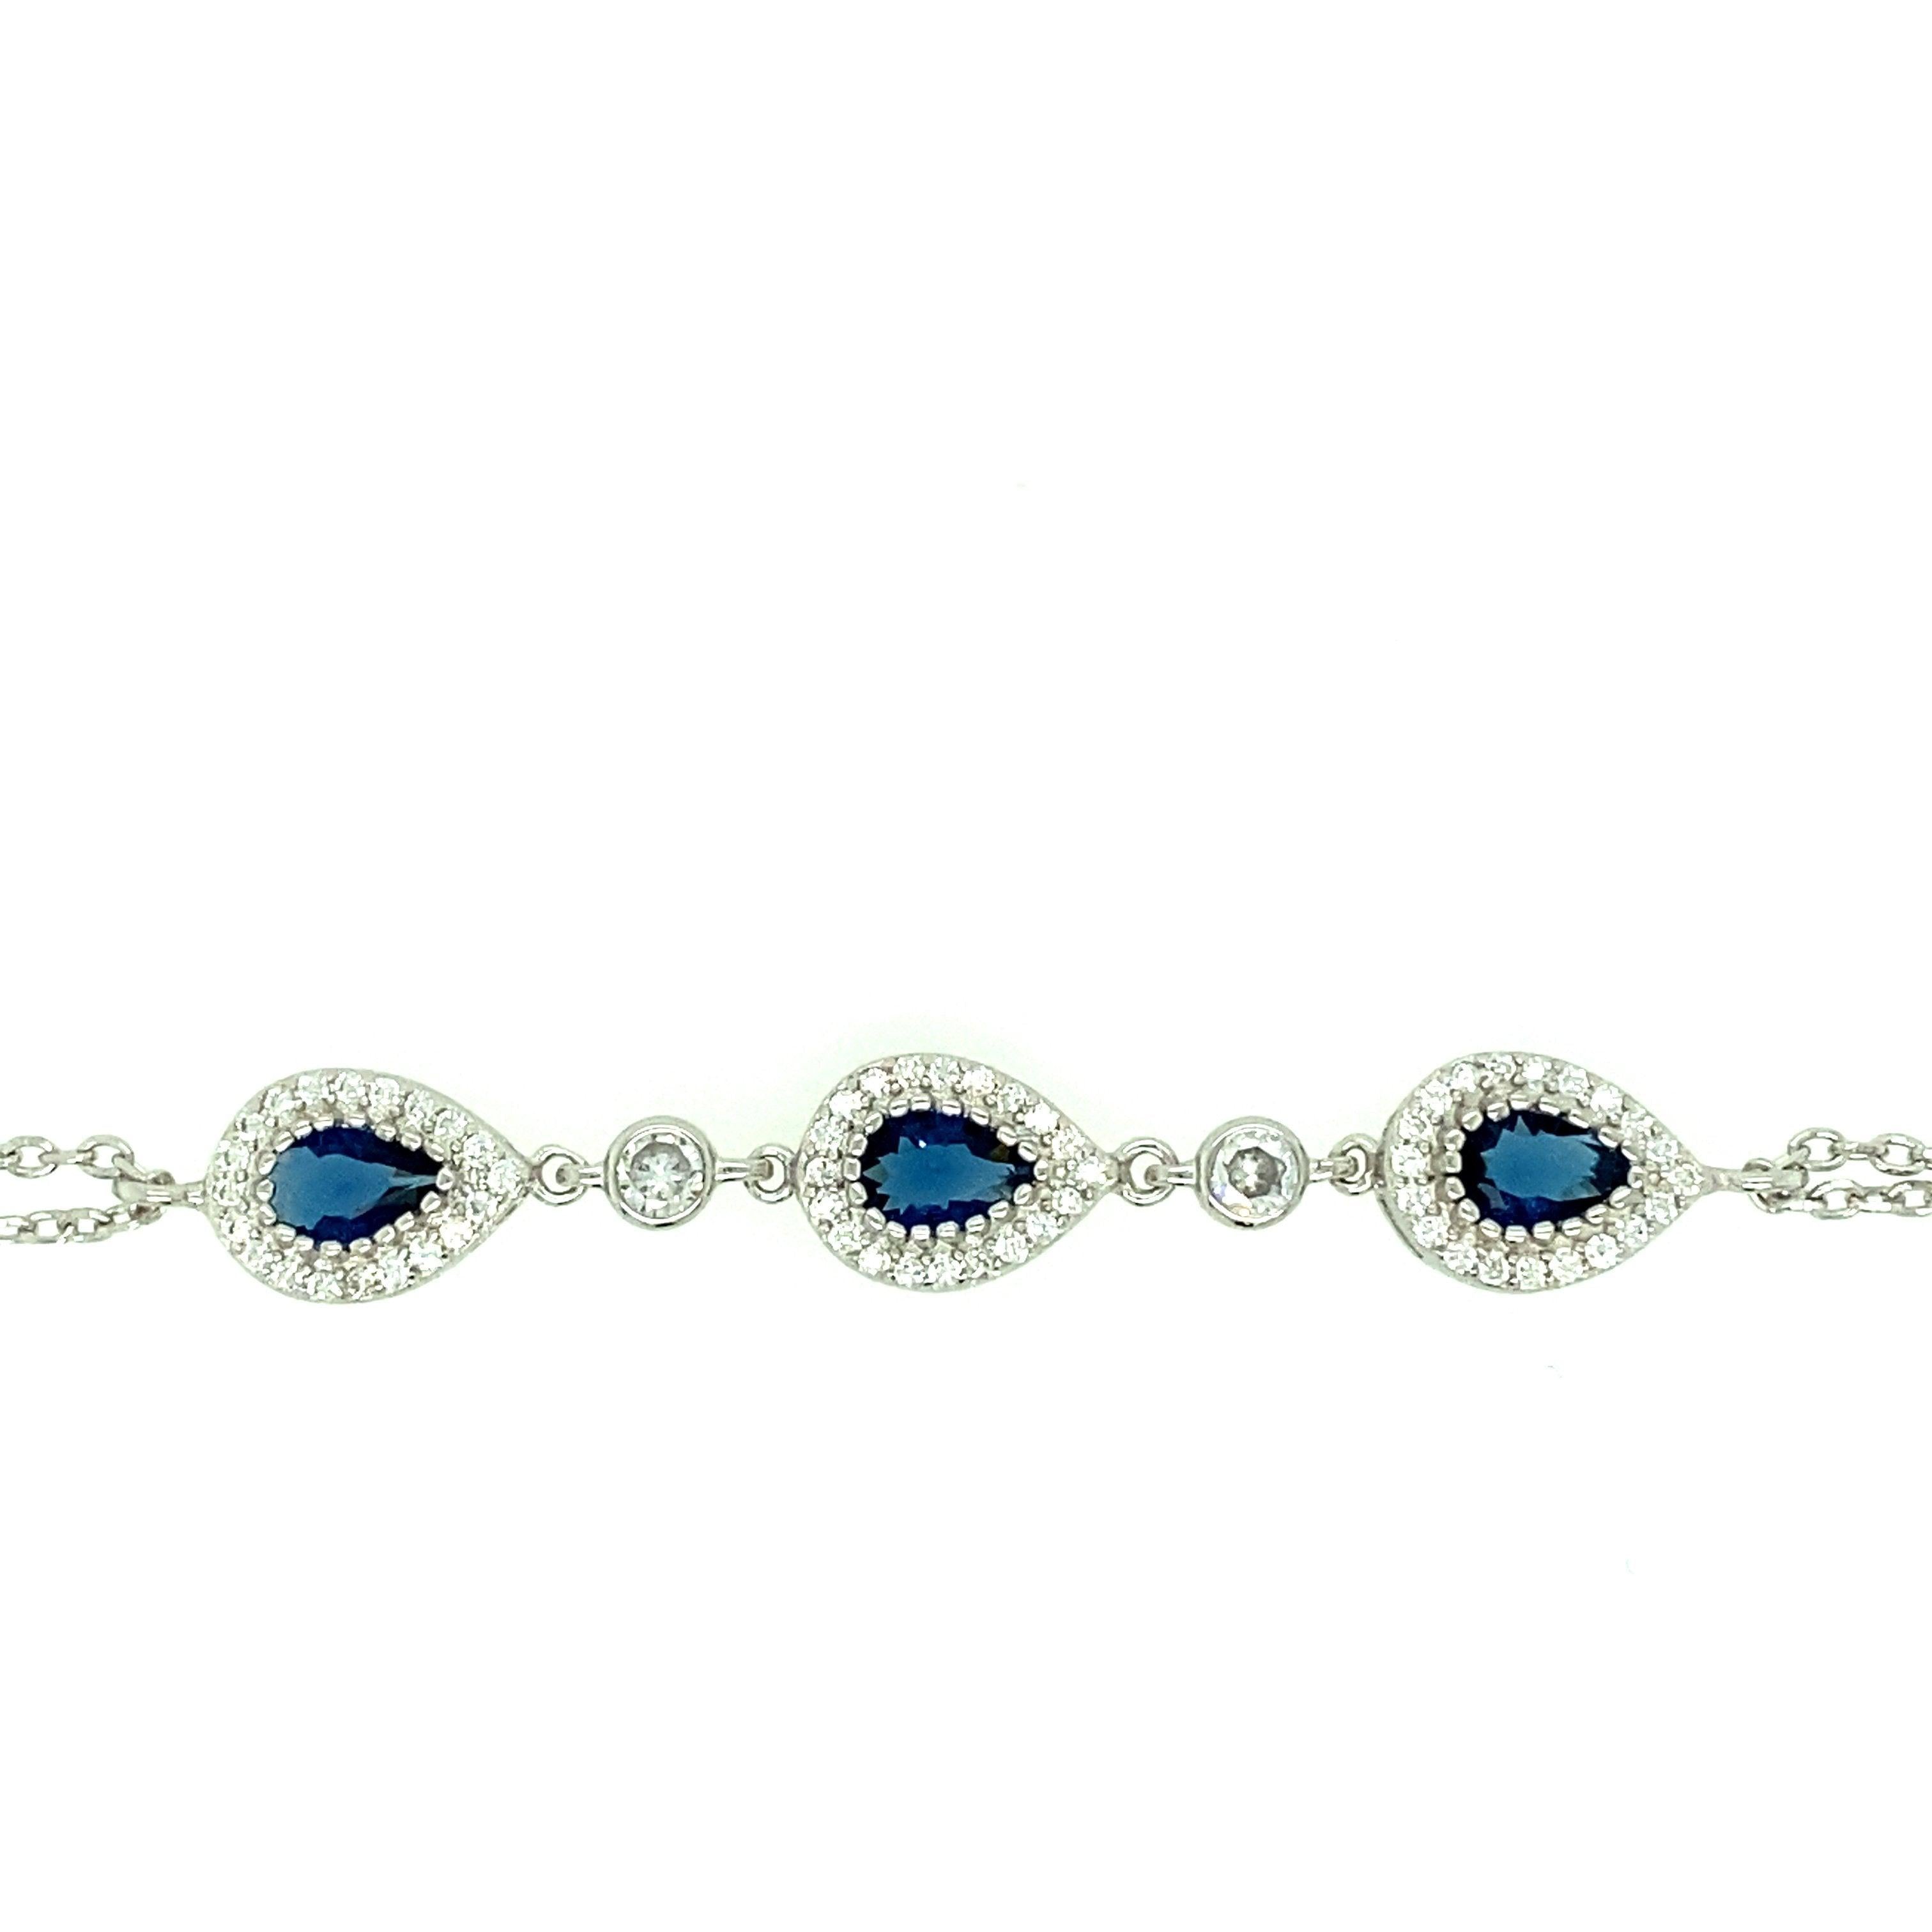 Asfour-Crystal-accessories-Bracelet-b1621-p-925-Sterling-Silver